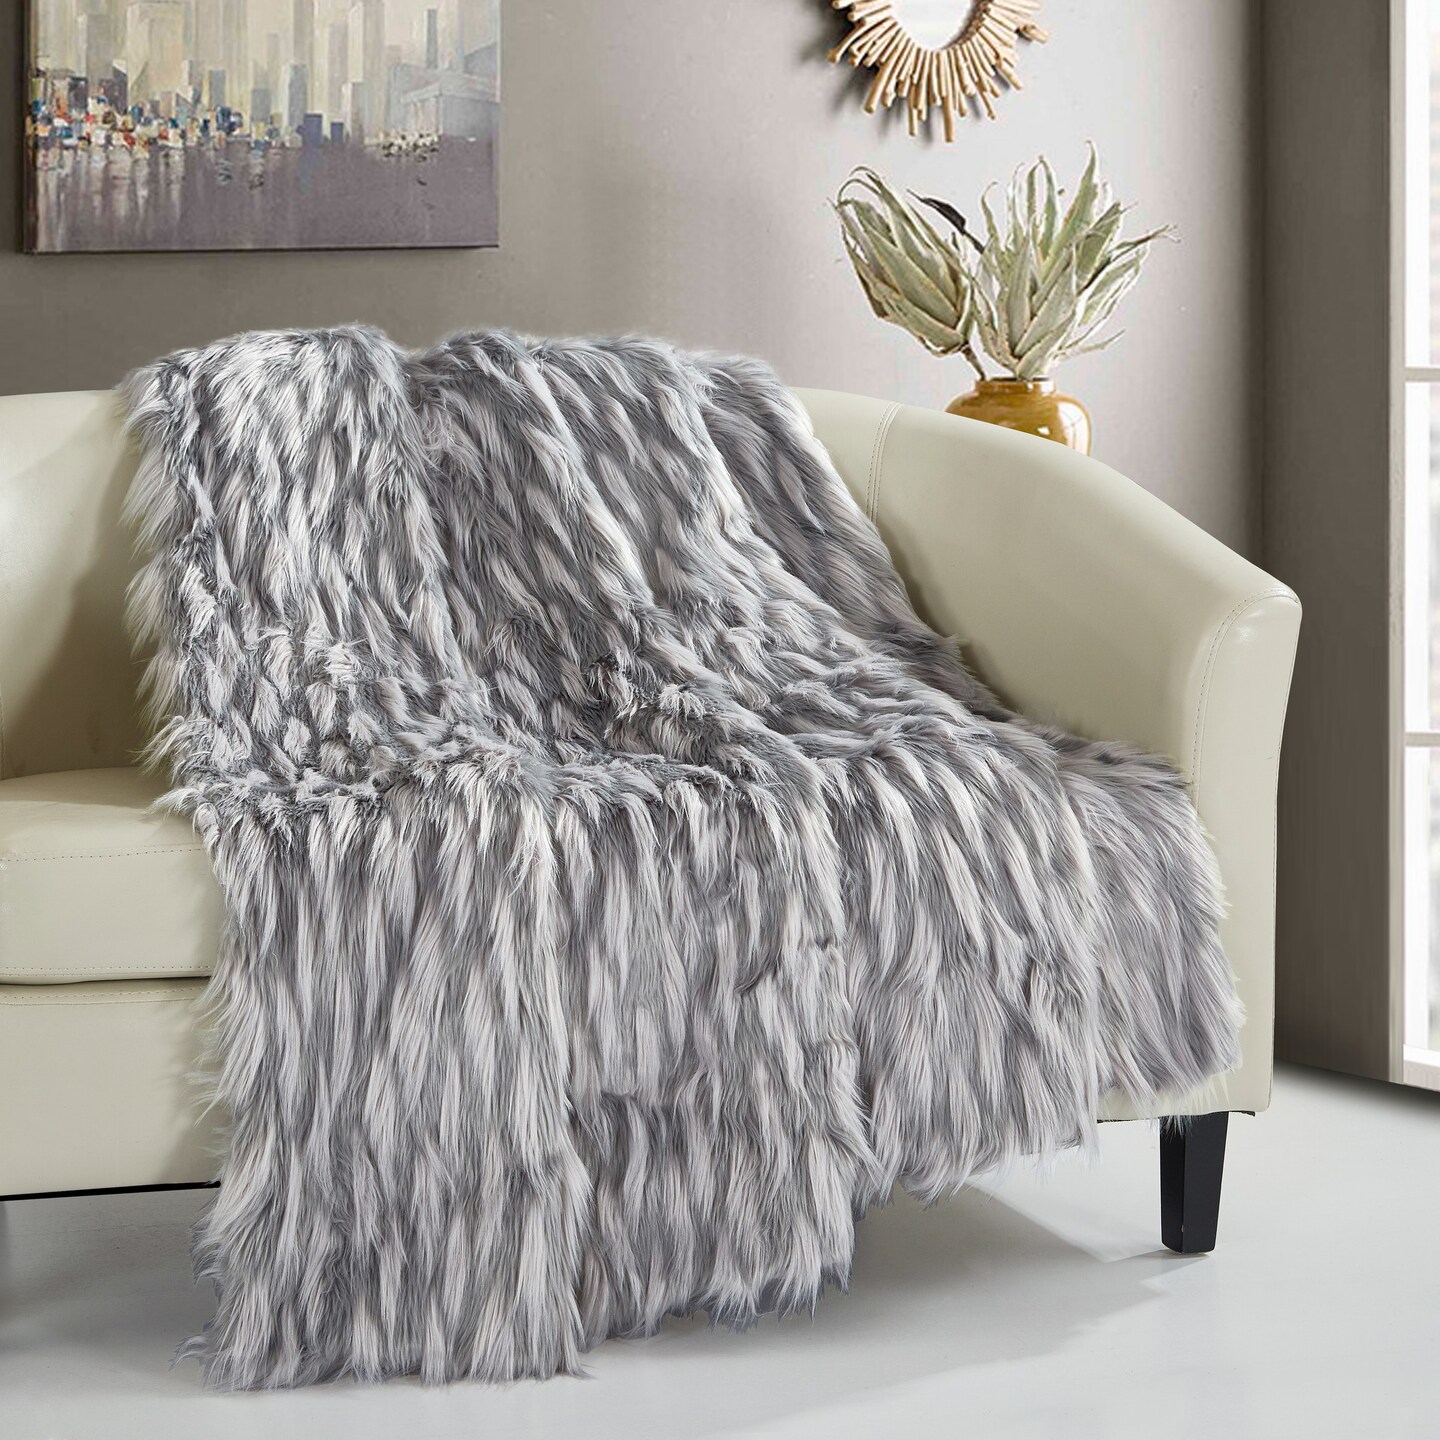 Chic Home Levida Throw Blanket Super Soft Ultra Plush Micromink Backing Decorative Two-Tone Design